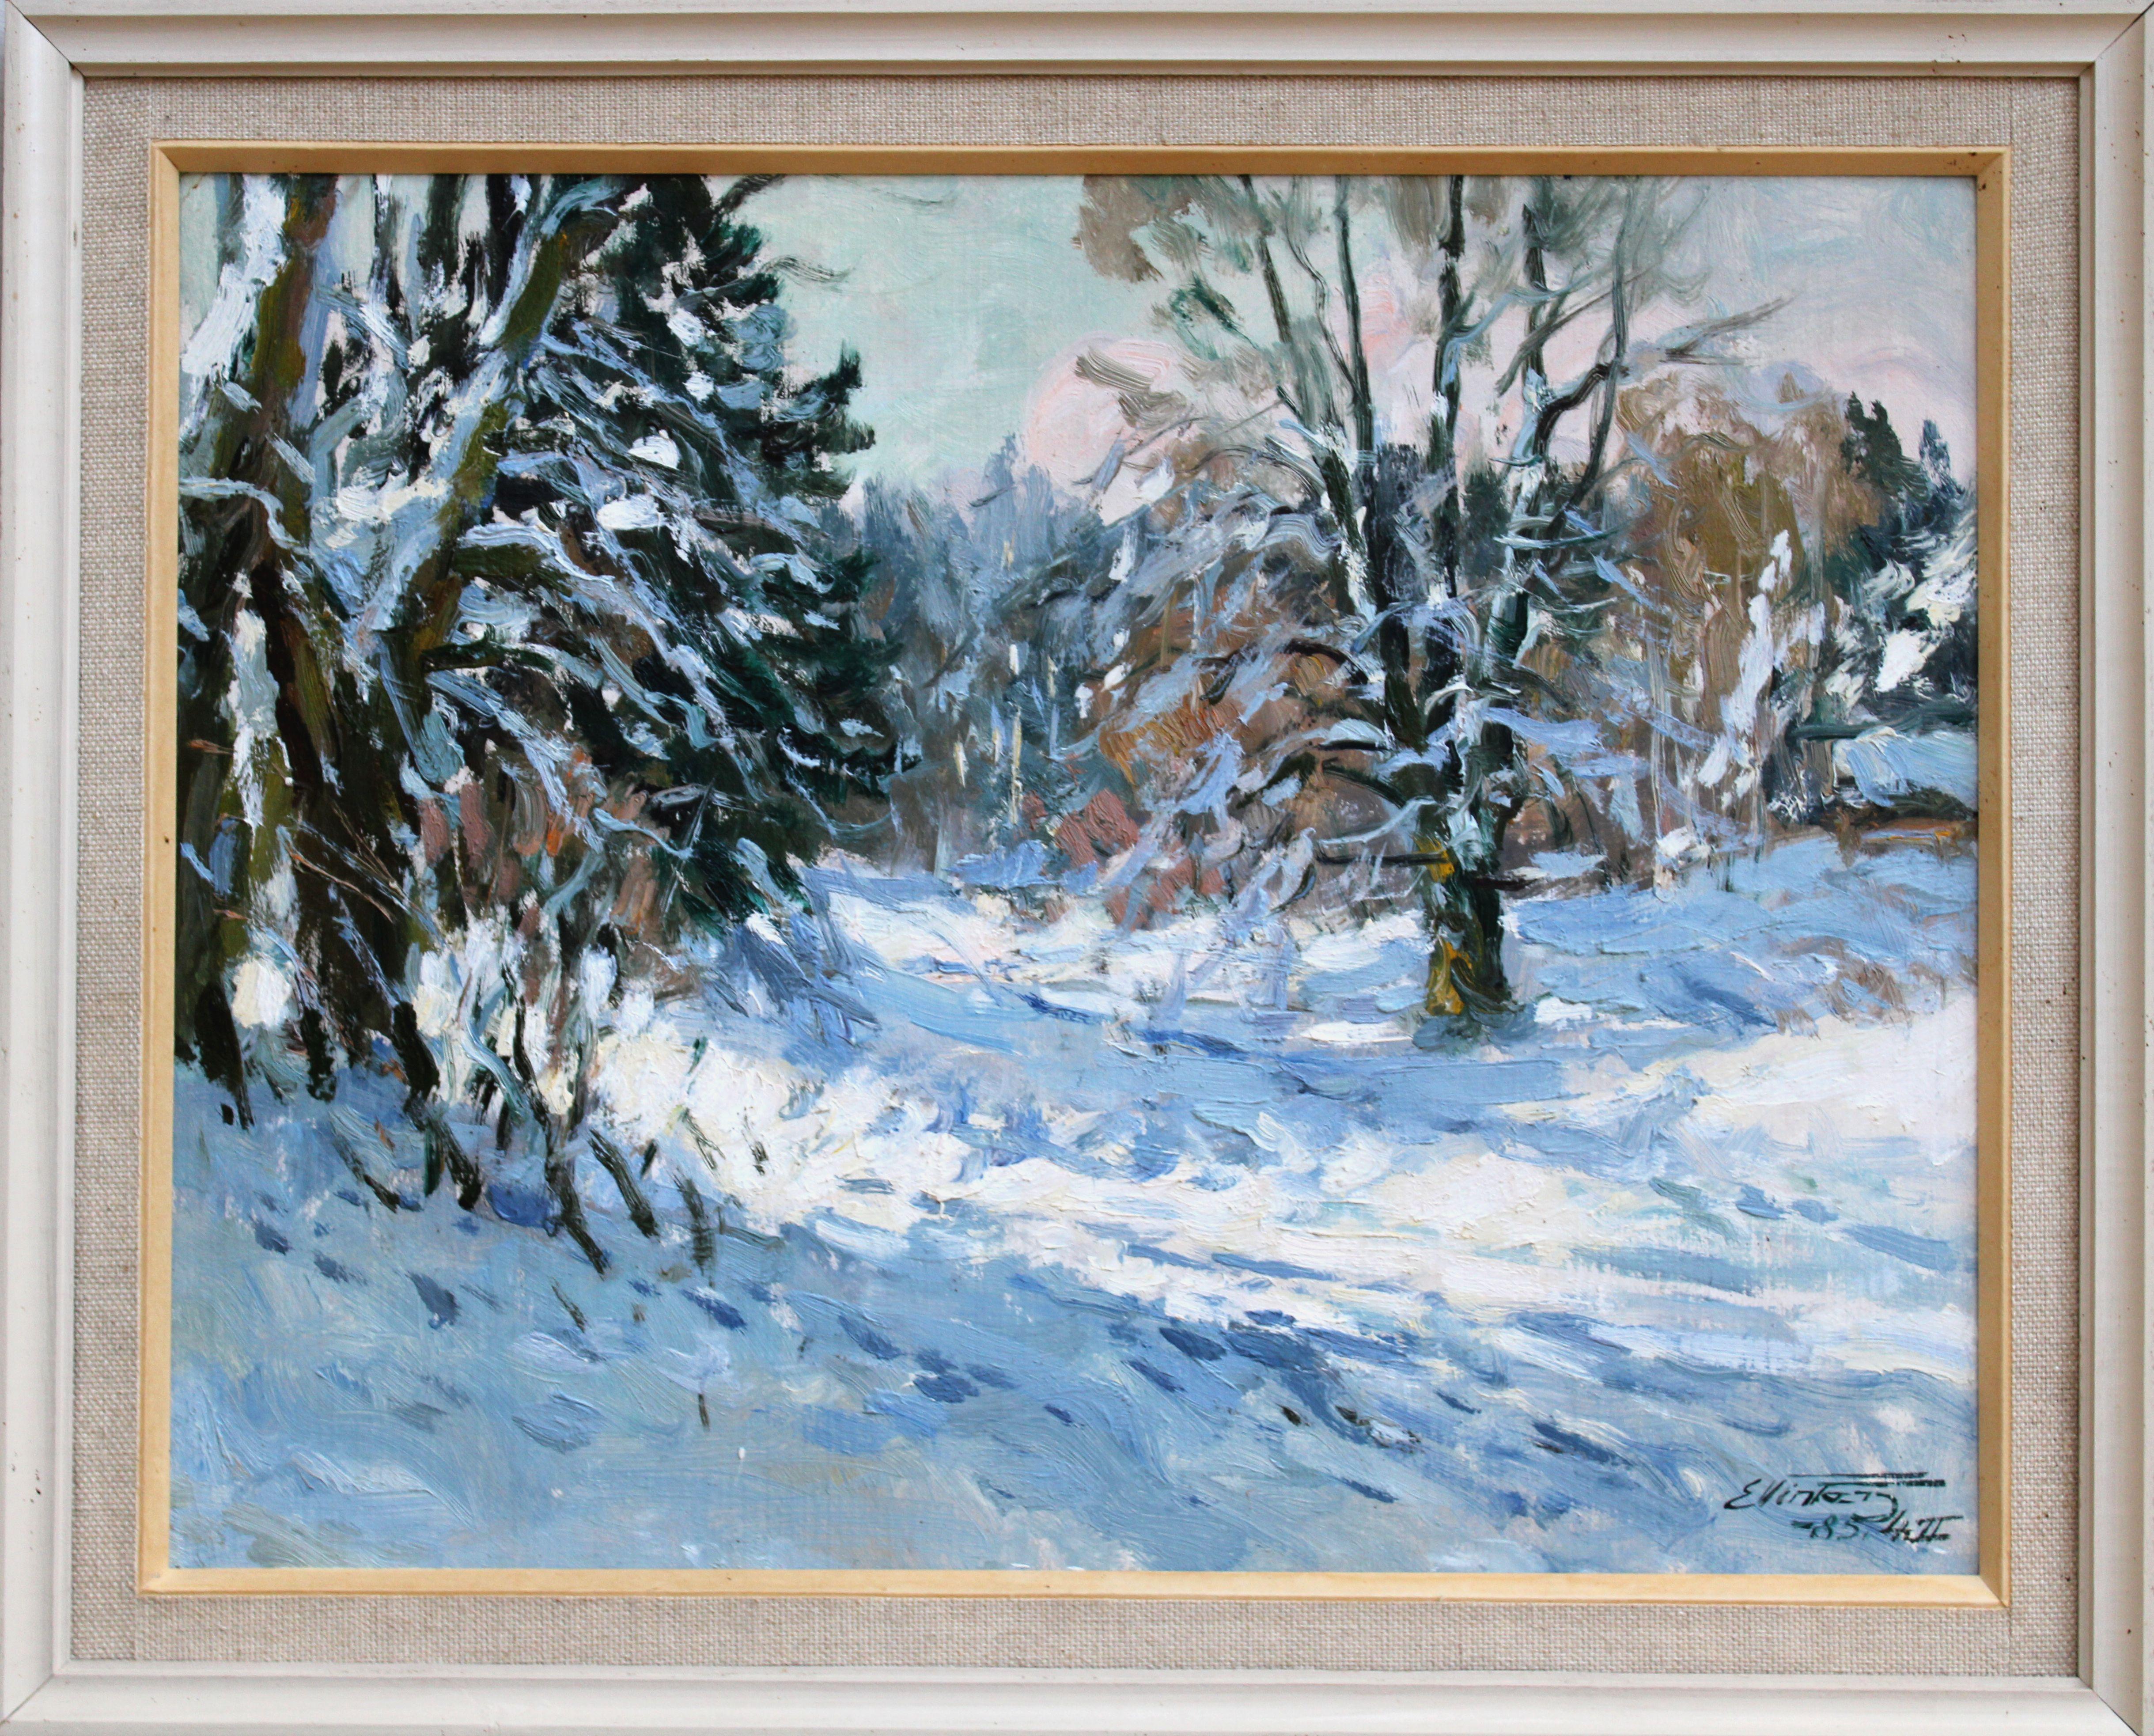 Sunny winter landscape. 1985, cardboard, oil, 45x58 cm - Painting by Edgars Vinters